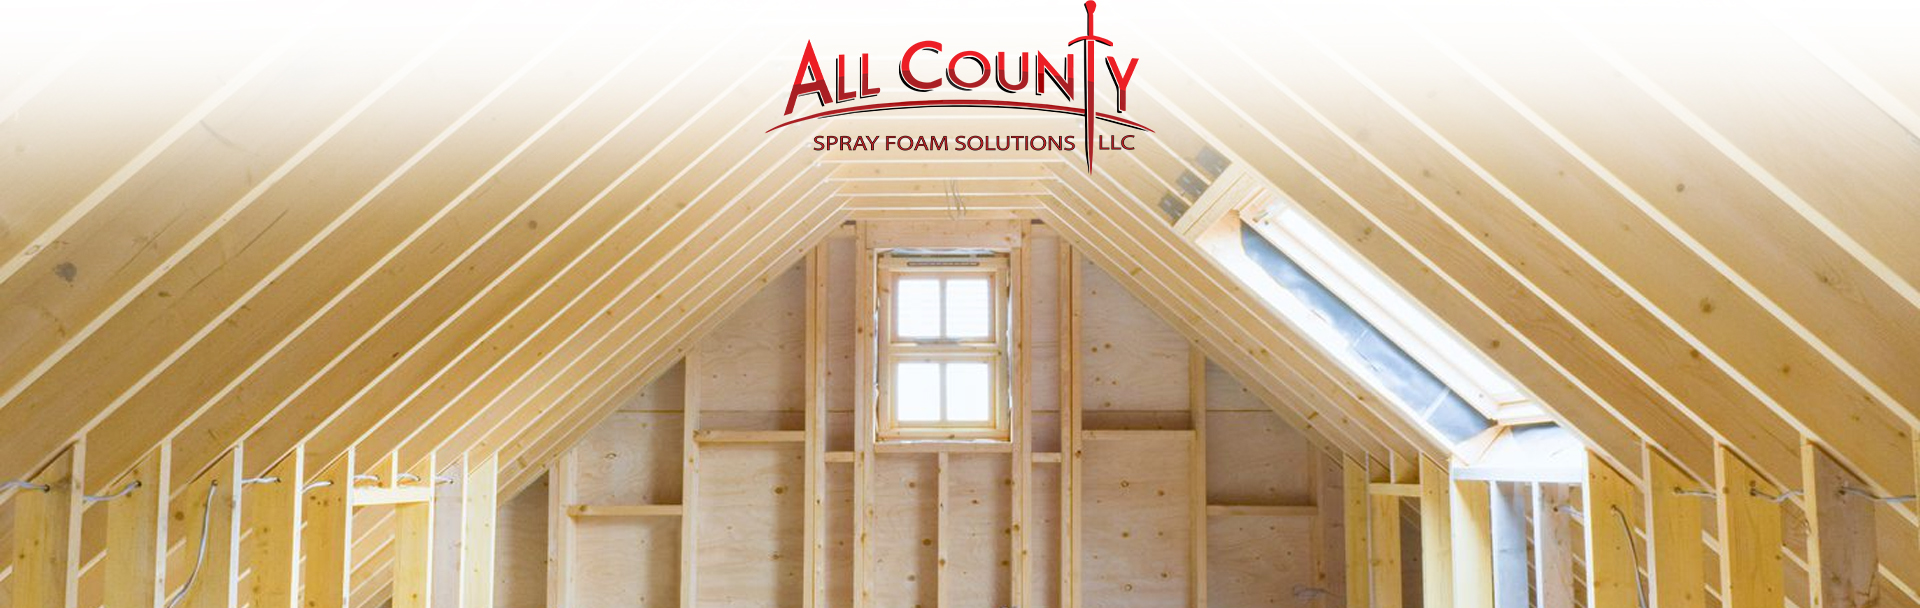 All County Spray Foam Solutions | Spray Foam, Insulation, Roofing, Concrete Lifting, Slab Lifting, Concrete Foundation Repair | (NYC) Manhattan, Long Island, Brooklyn, Bronx, Queens, NY | 718.406.5672 | Email: ACSprayFoam@gmail.com - footer image with All County logo